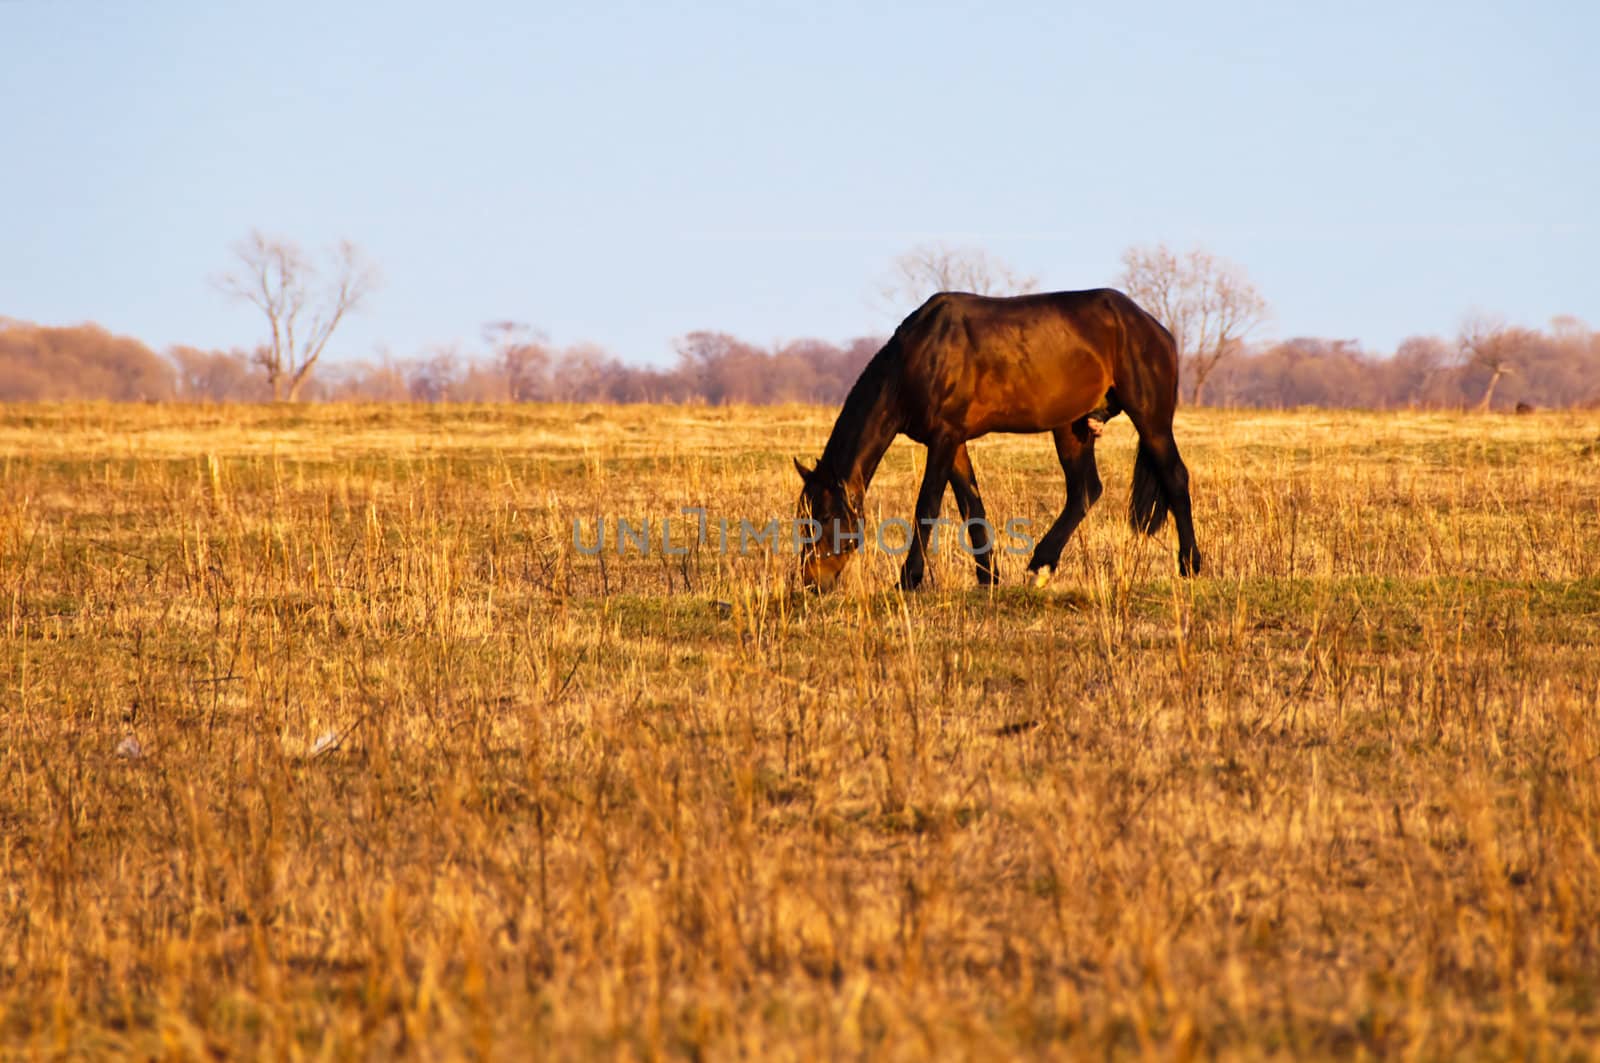 a horse in a field by alena0509